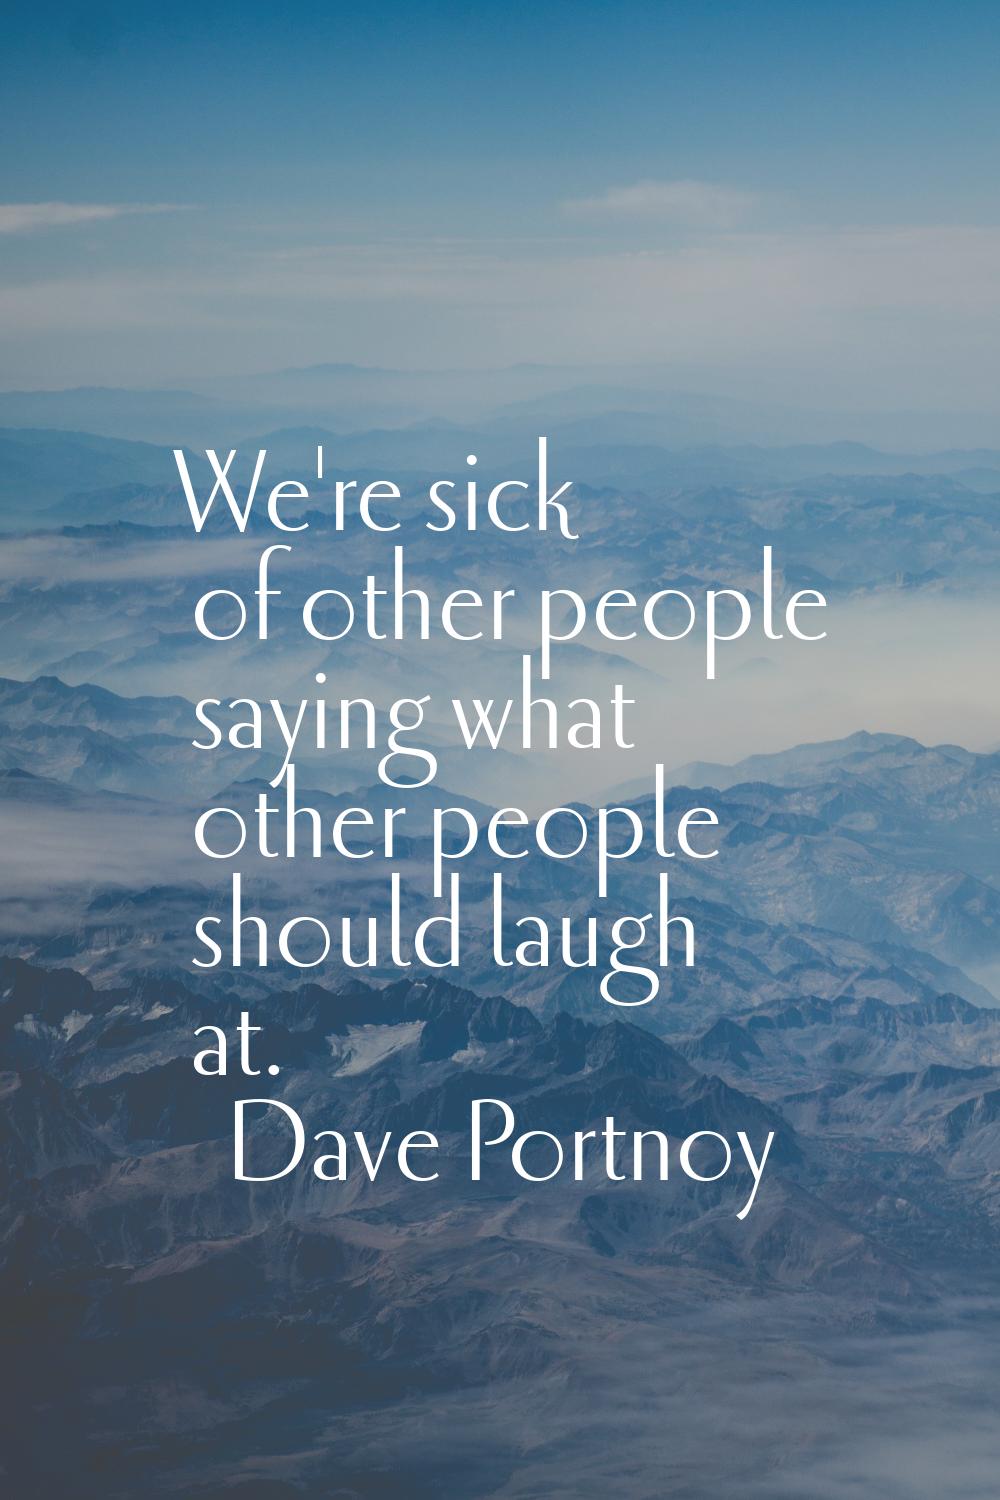 We're sick of other people saying what other people should laugh at.